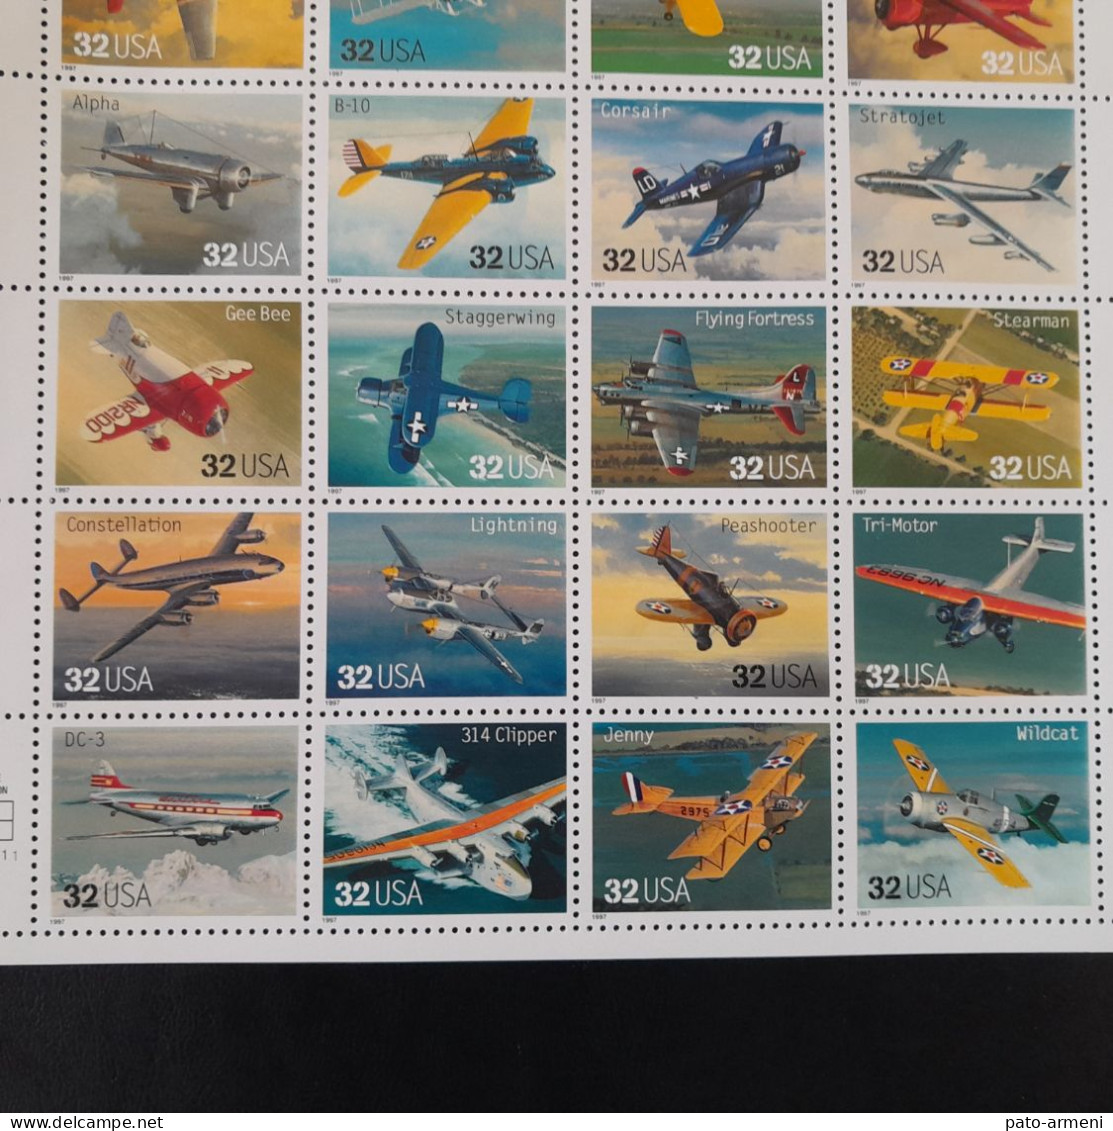 Timbres US (1997)- Classic American Aircraft Feuille De 20- SC#3142 - Nuovi